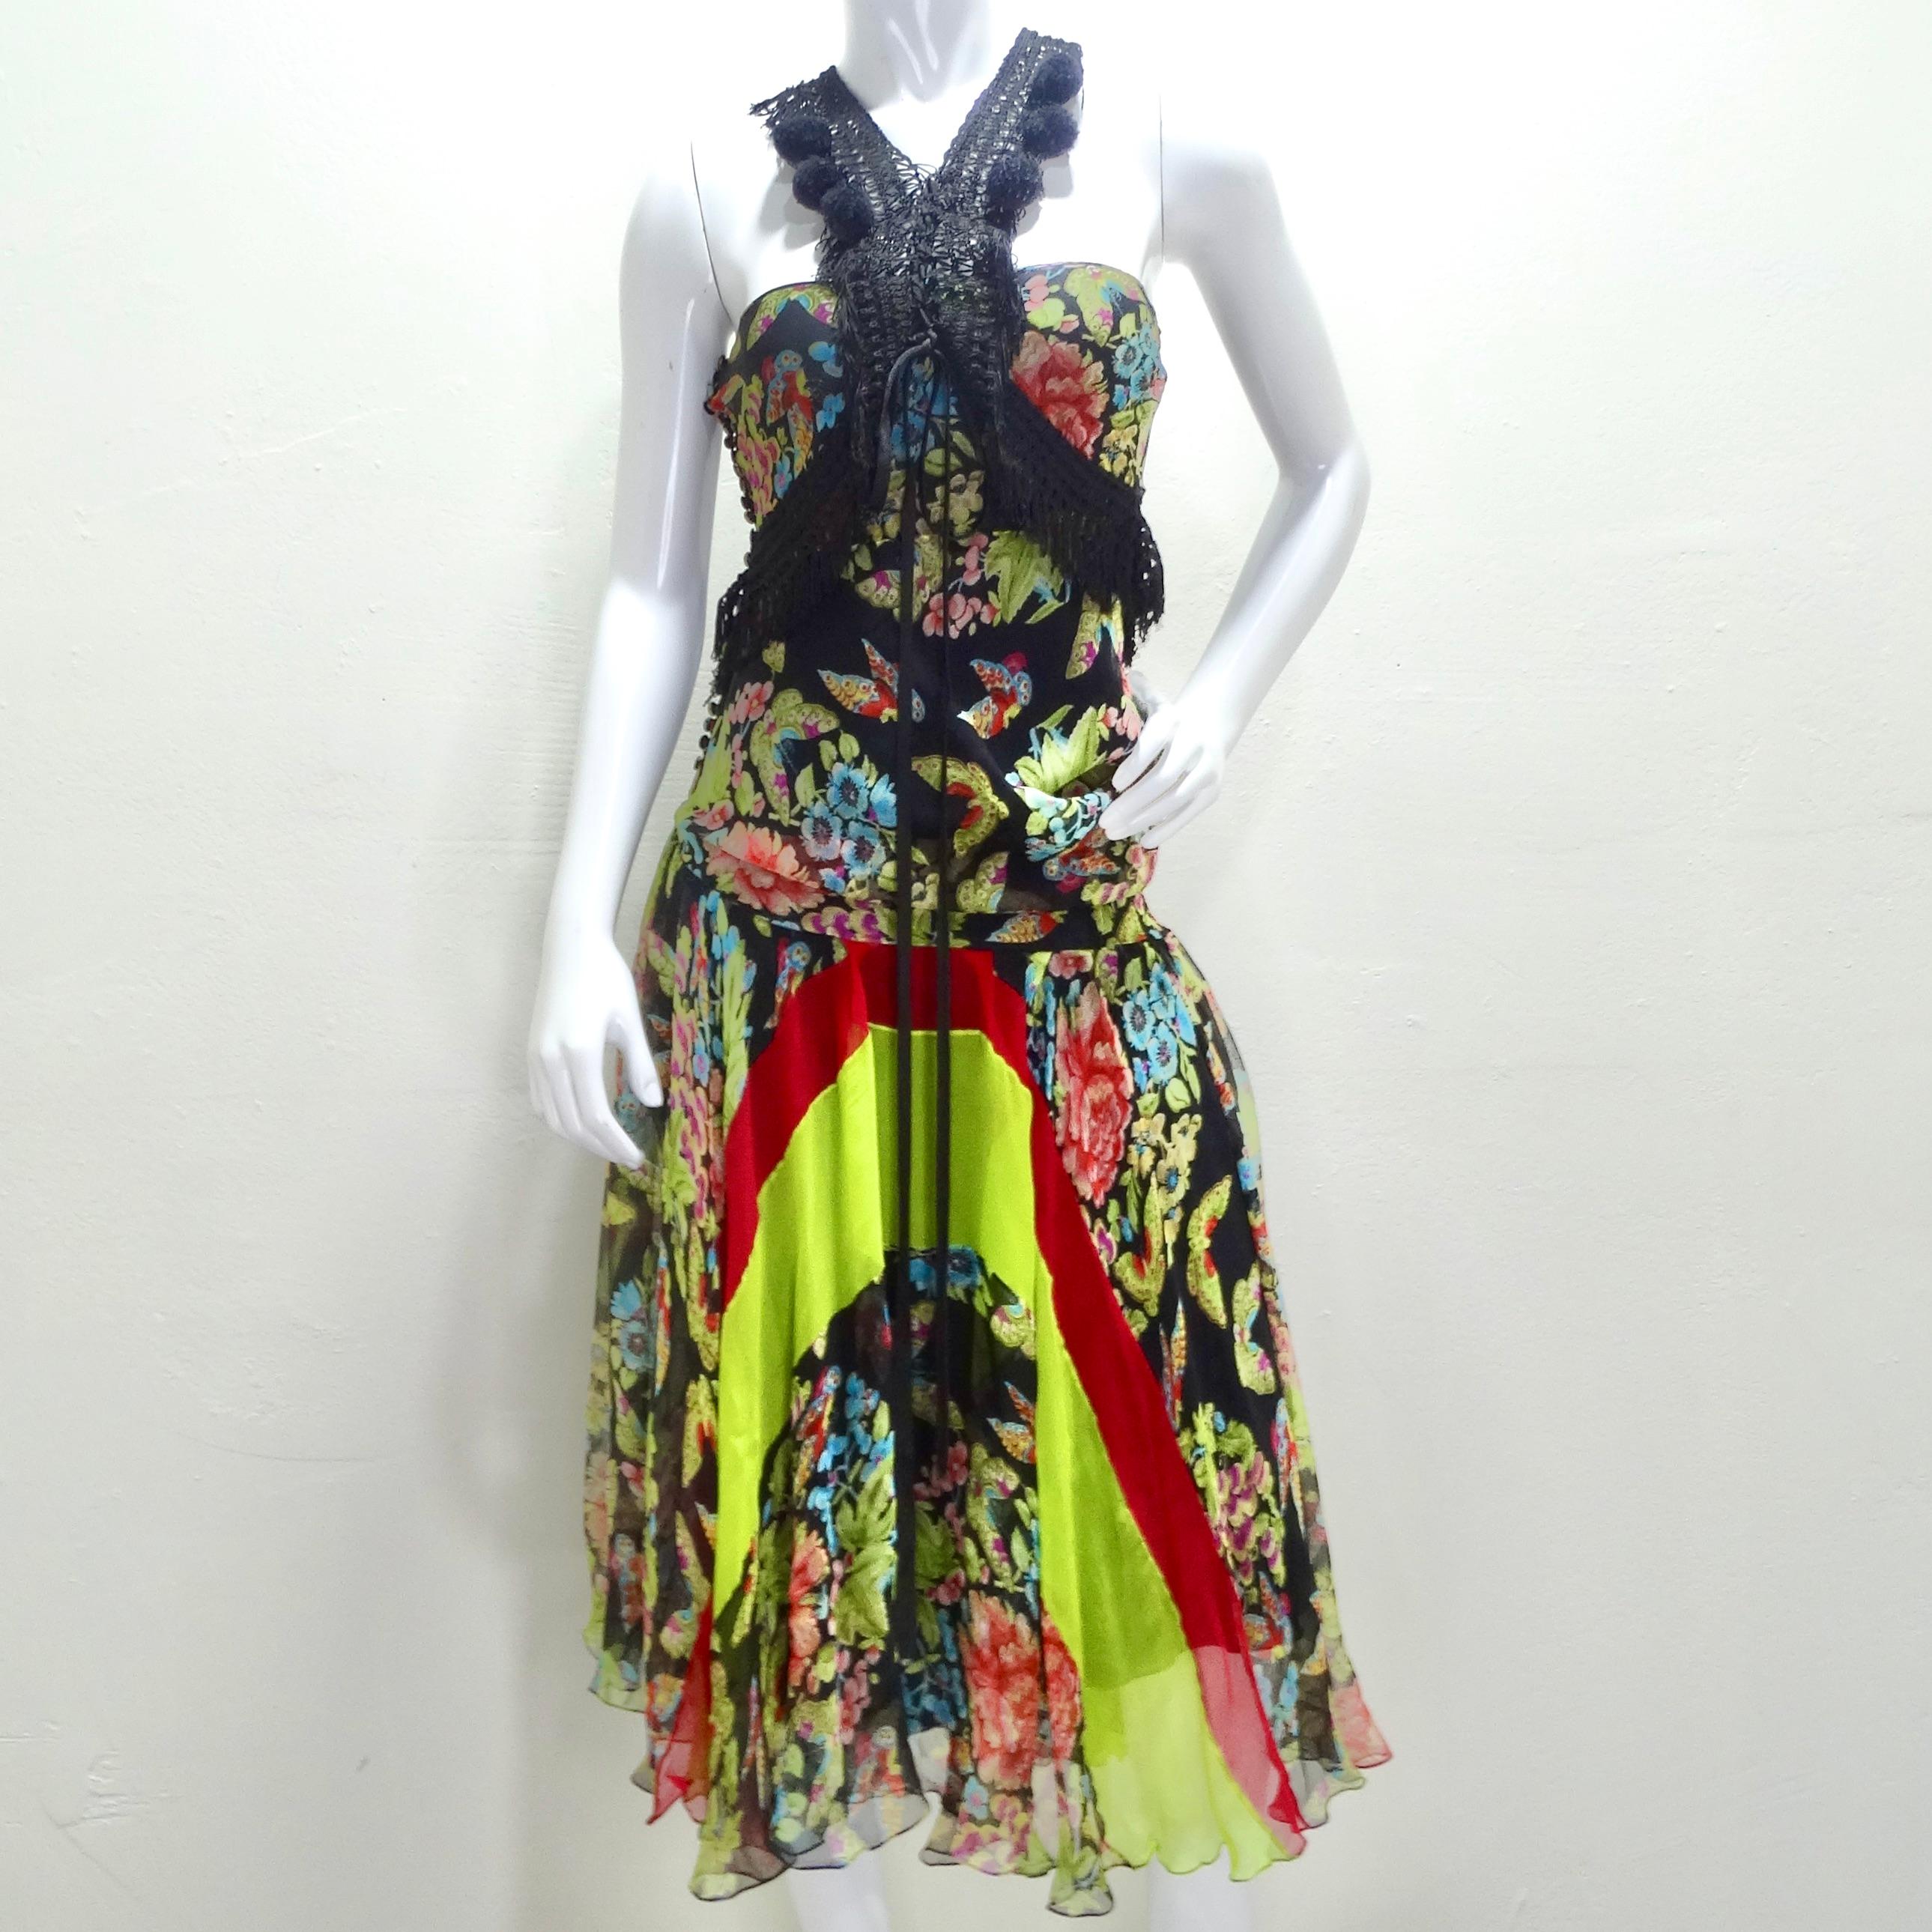 Do not miss out on the John Galliano F/W 2002 Esquimeau Printed Silk Bias Cut Dress – a masterpiece of vibrant artistry and iconic design. This dress isn't just a garment; it's a wearable piece of art that captures the essence of John Galliano's